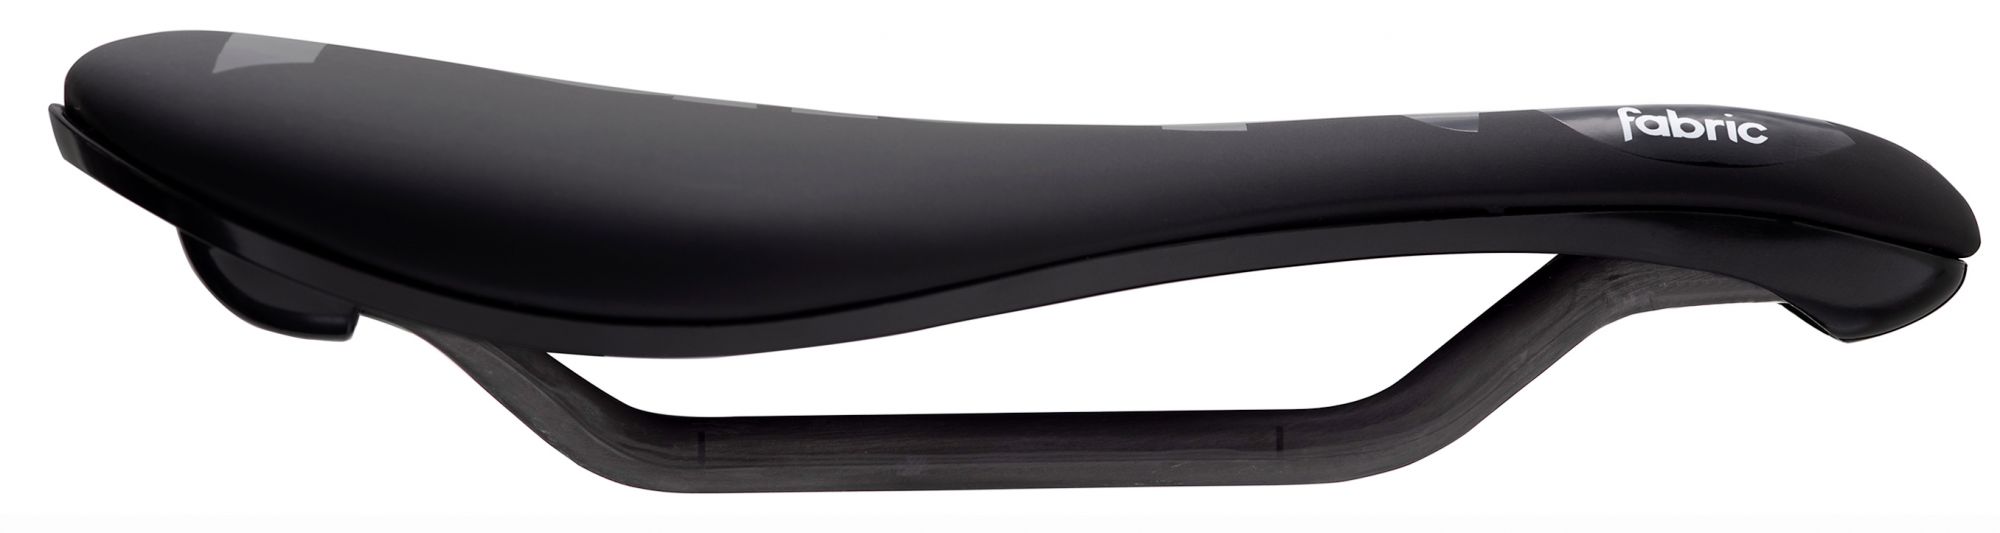 Fabric Line-S short road saddles get a nose job in the name of speed